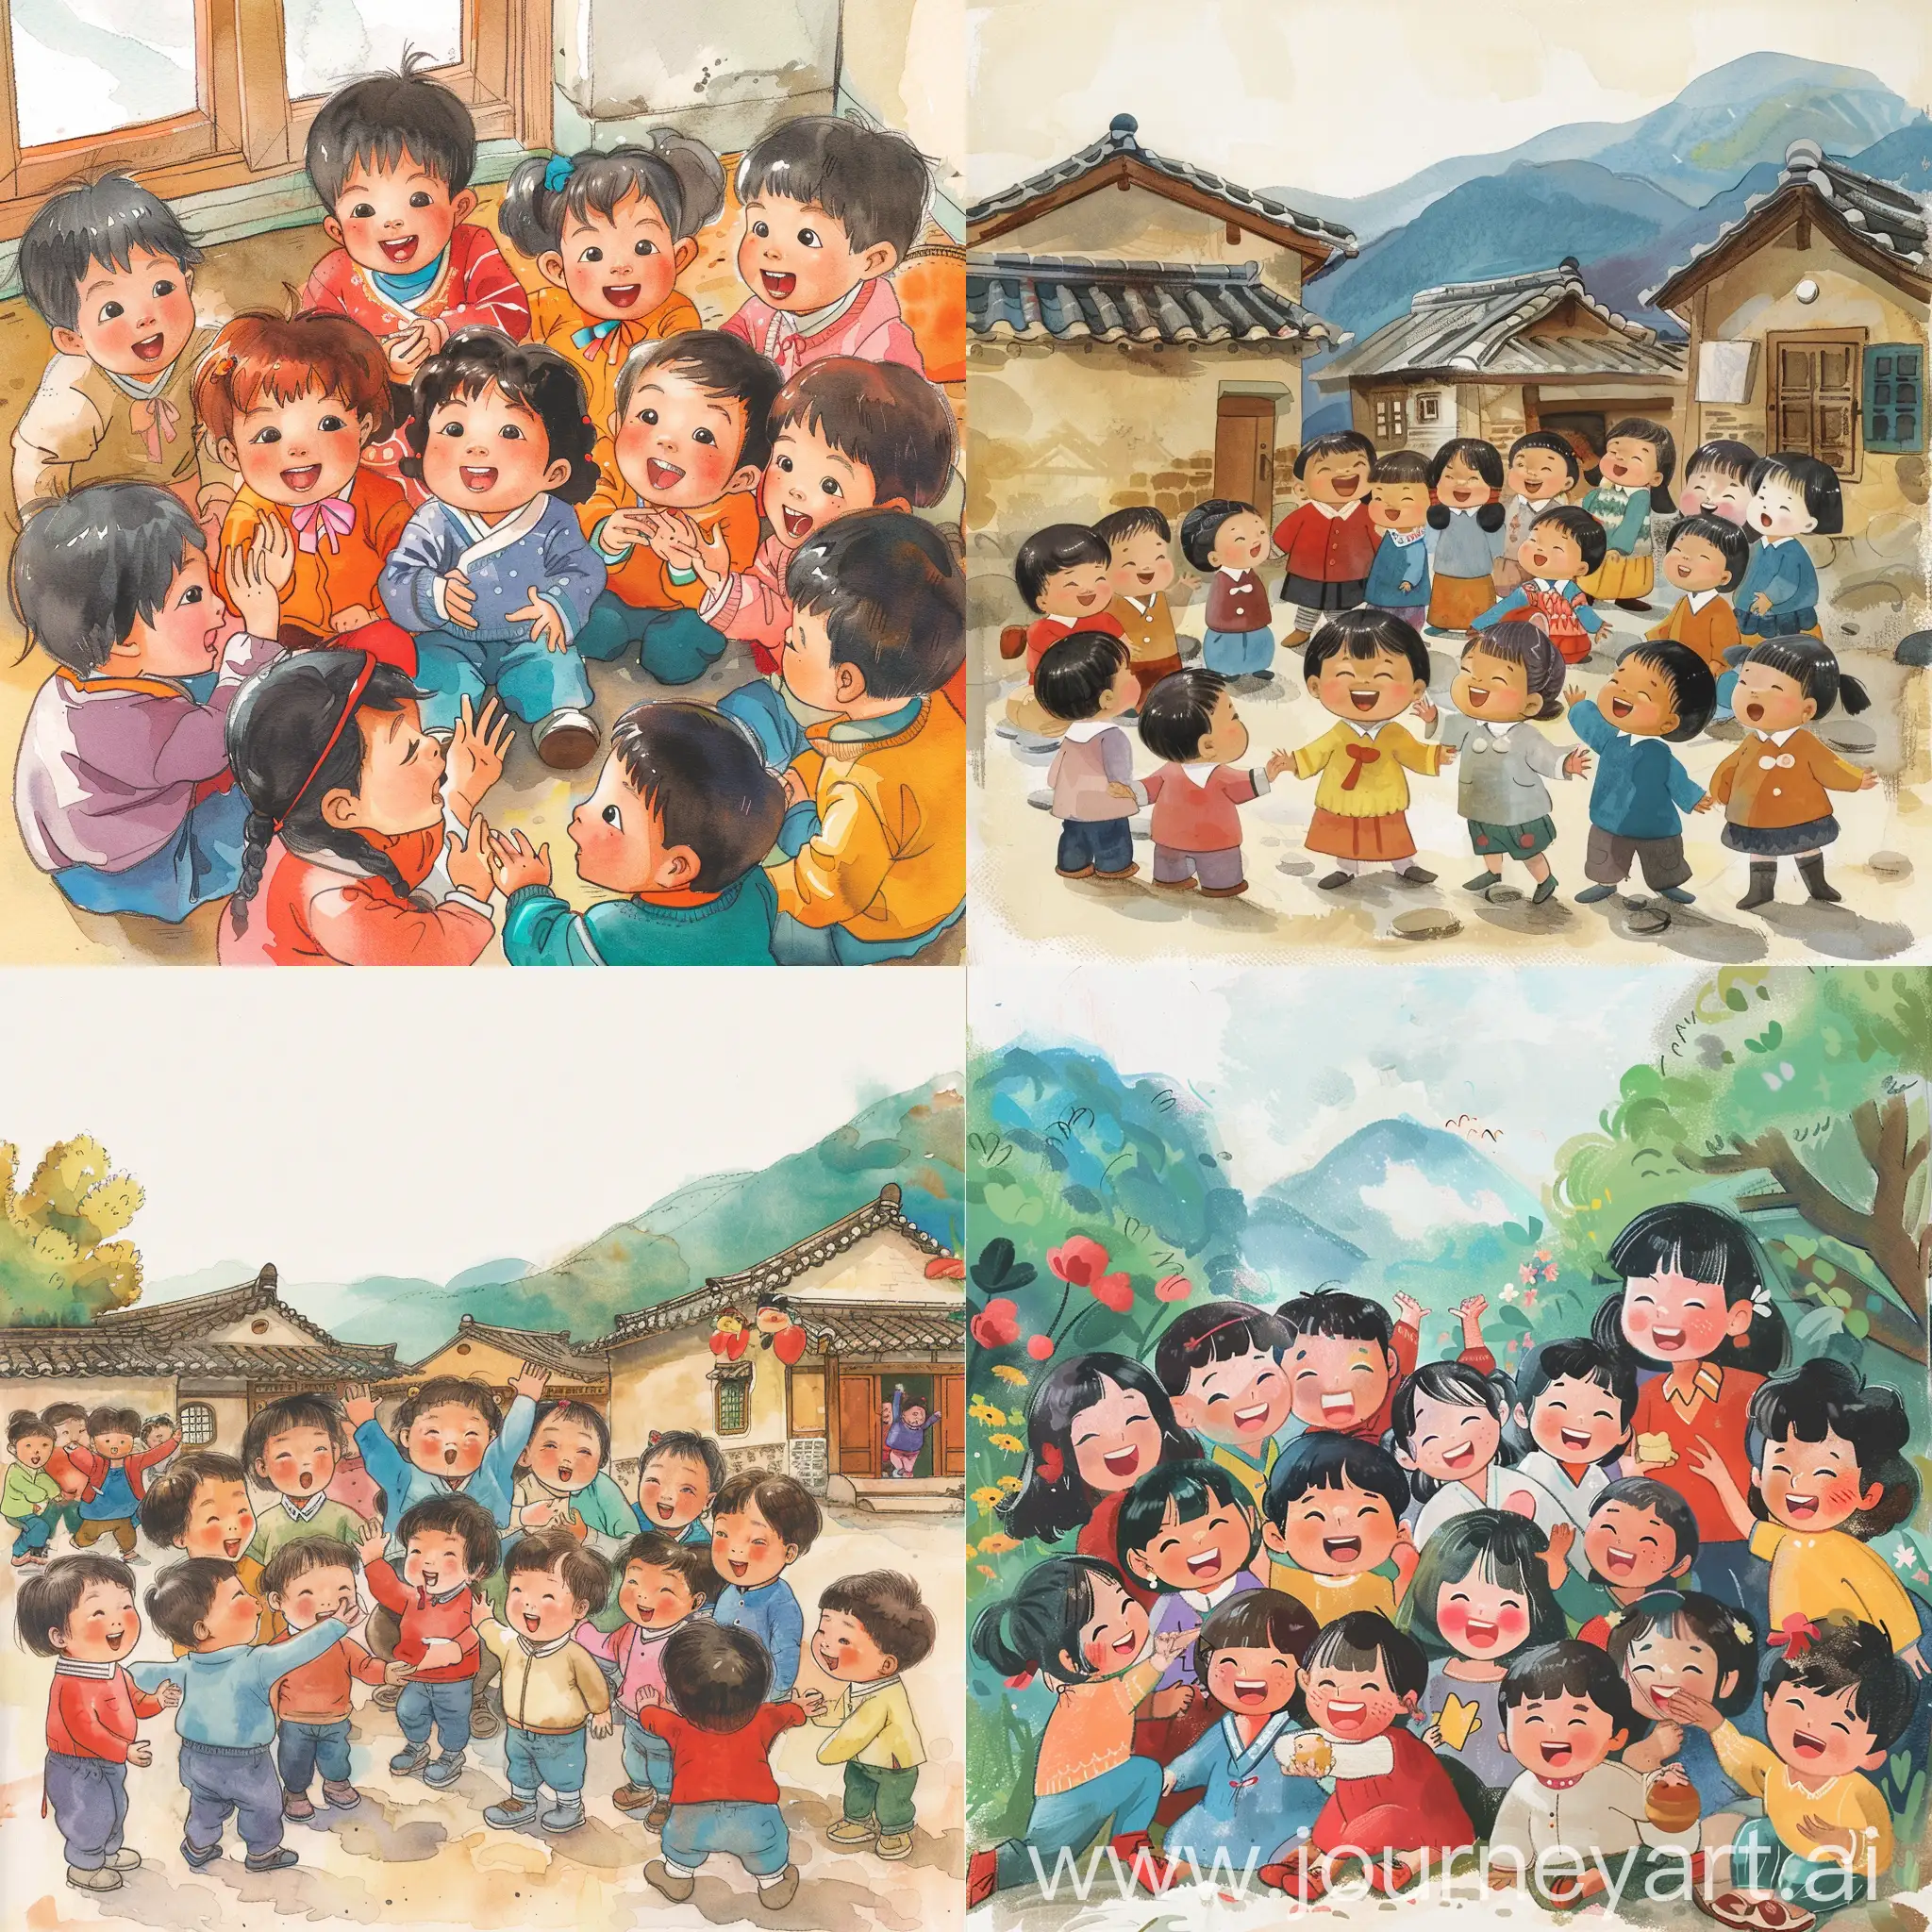 a children's storybook image with korea children gathered together and being positive